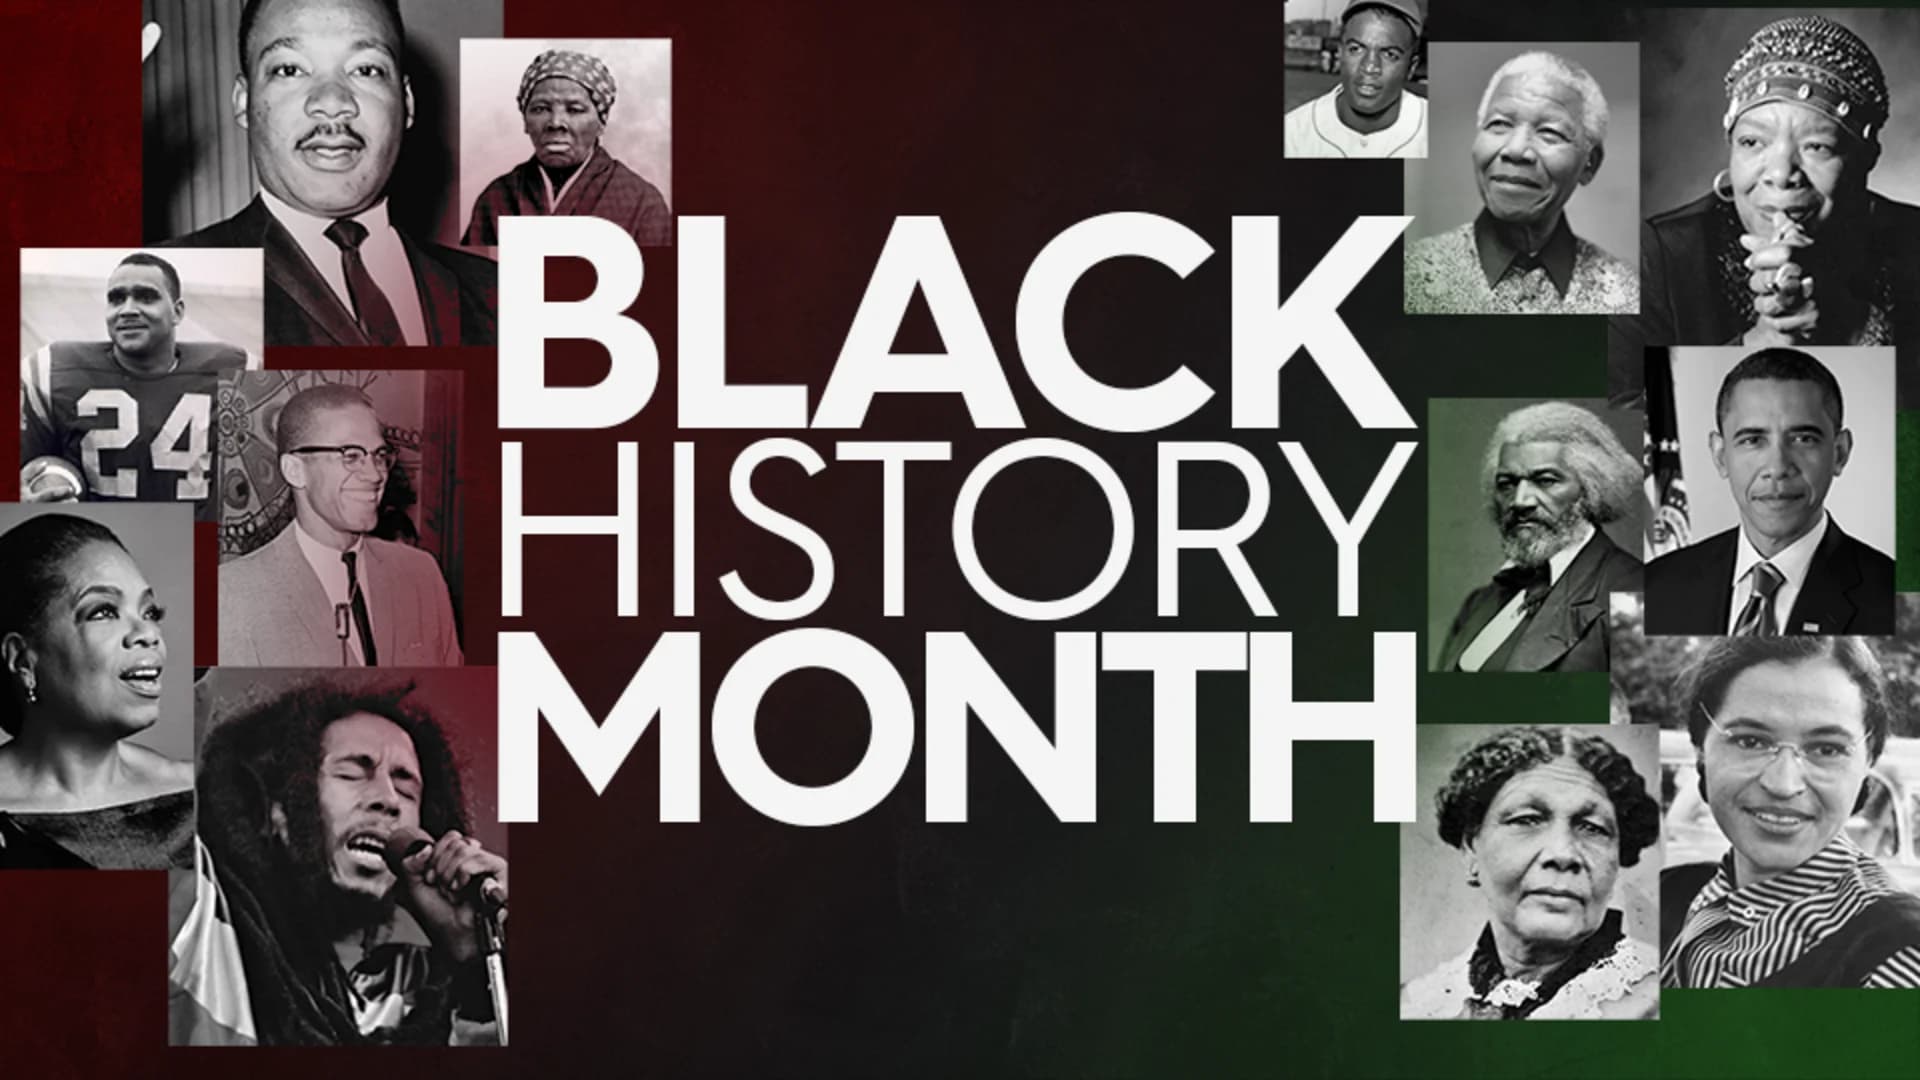 Black History Month events around Long Island